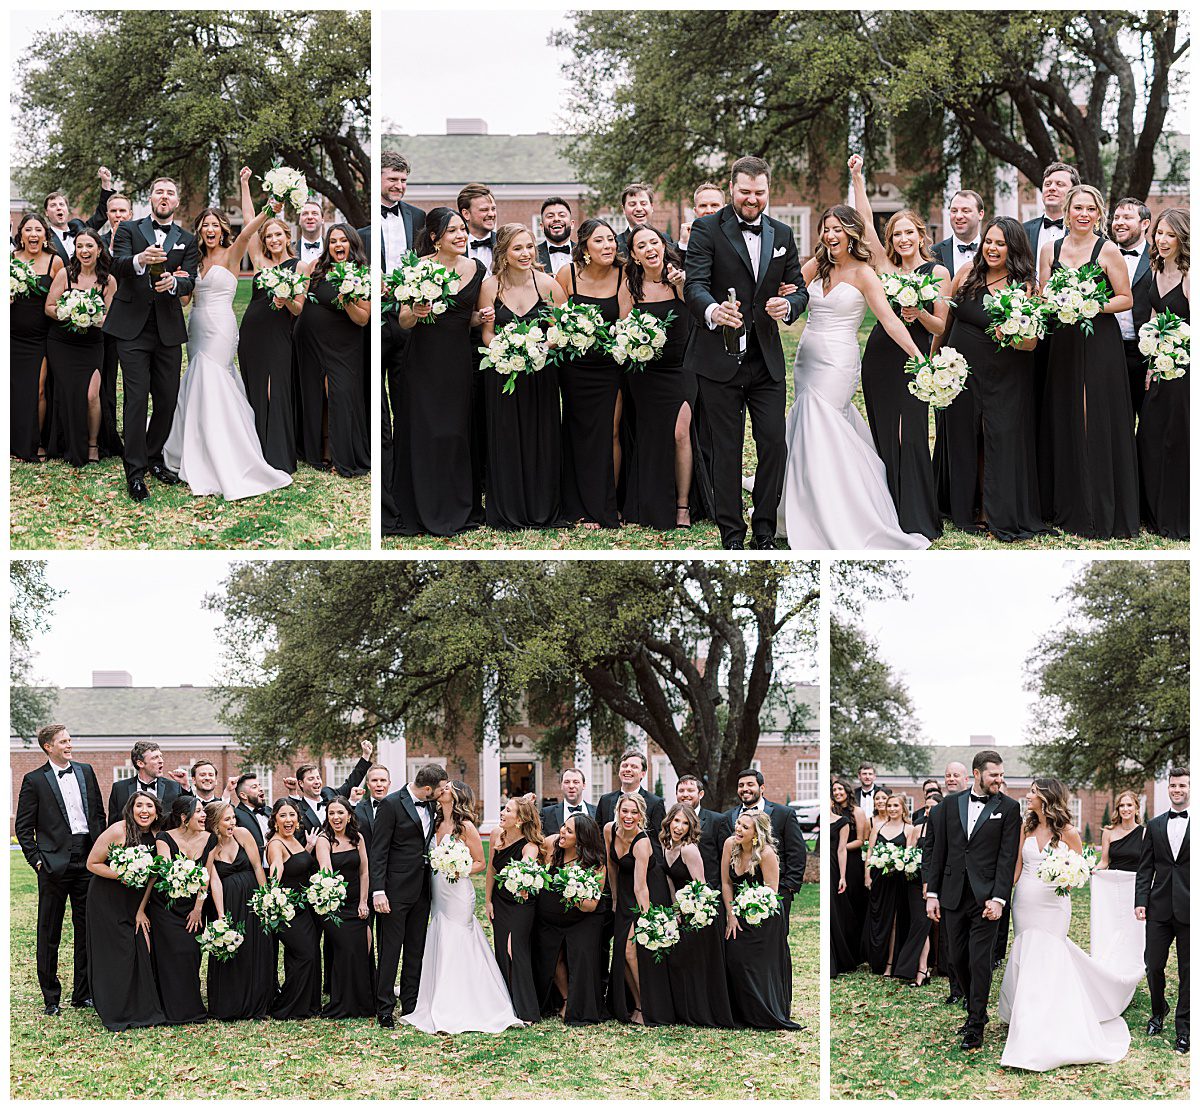 Wedding party portraits at The Colonial Country Club taken by Brittany Partain, a Texas wedding photographer. 